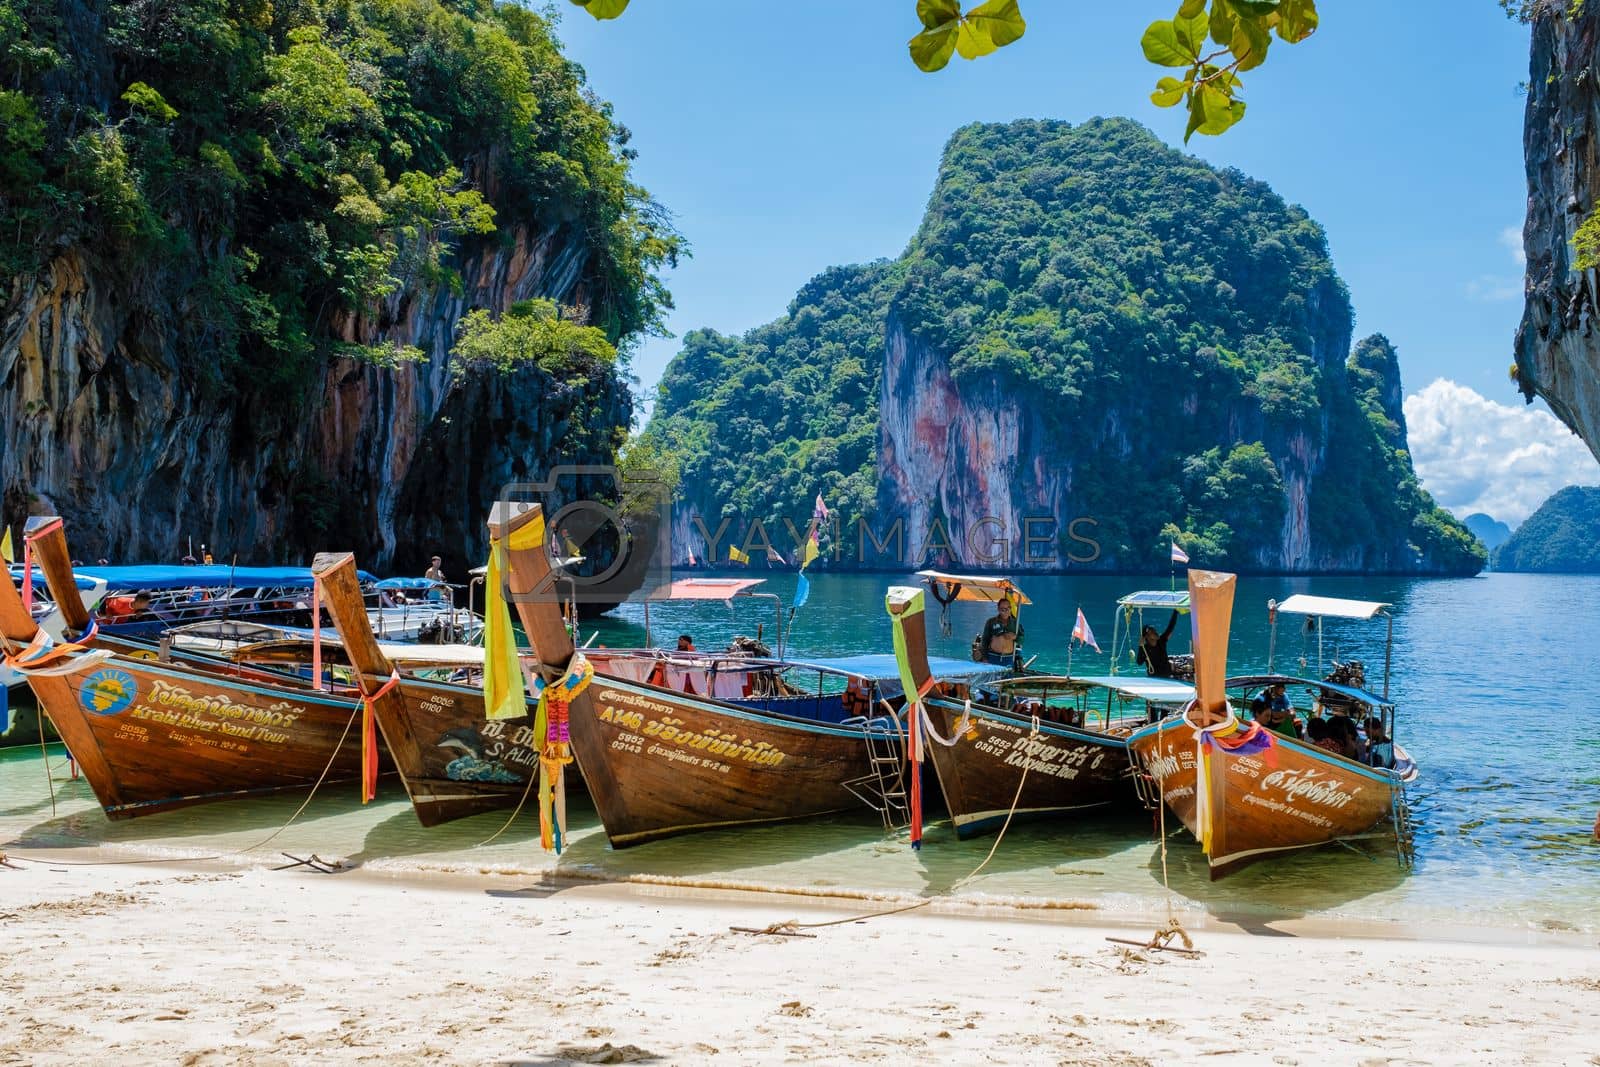 Royalty free image of Koh Loa Lading Krabi Thailand part of the Koh Hong Islands in Thailand, longtail boats on the ebach by fokkebok